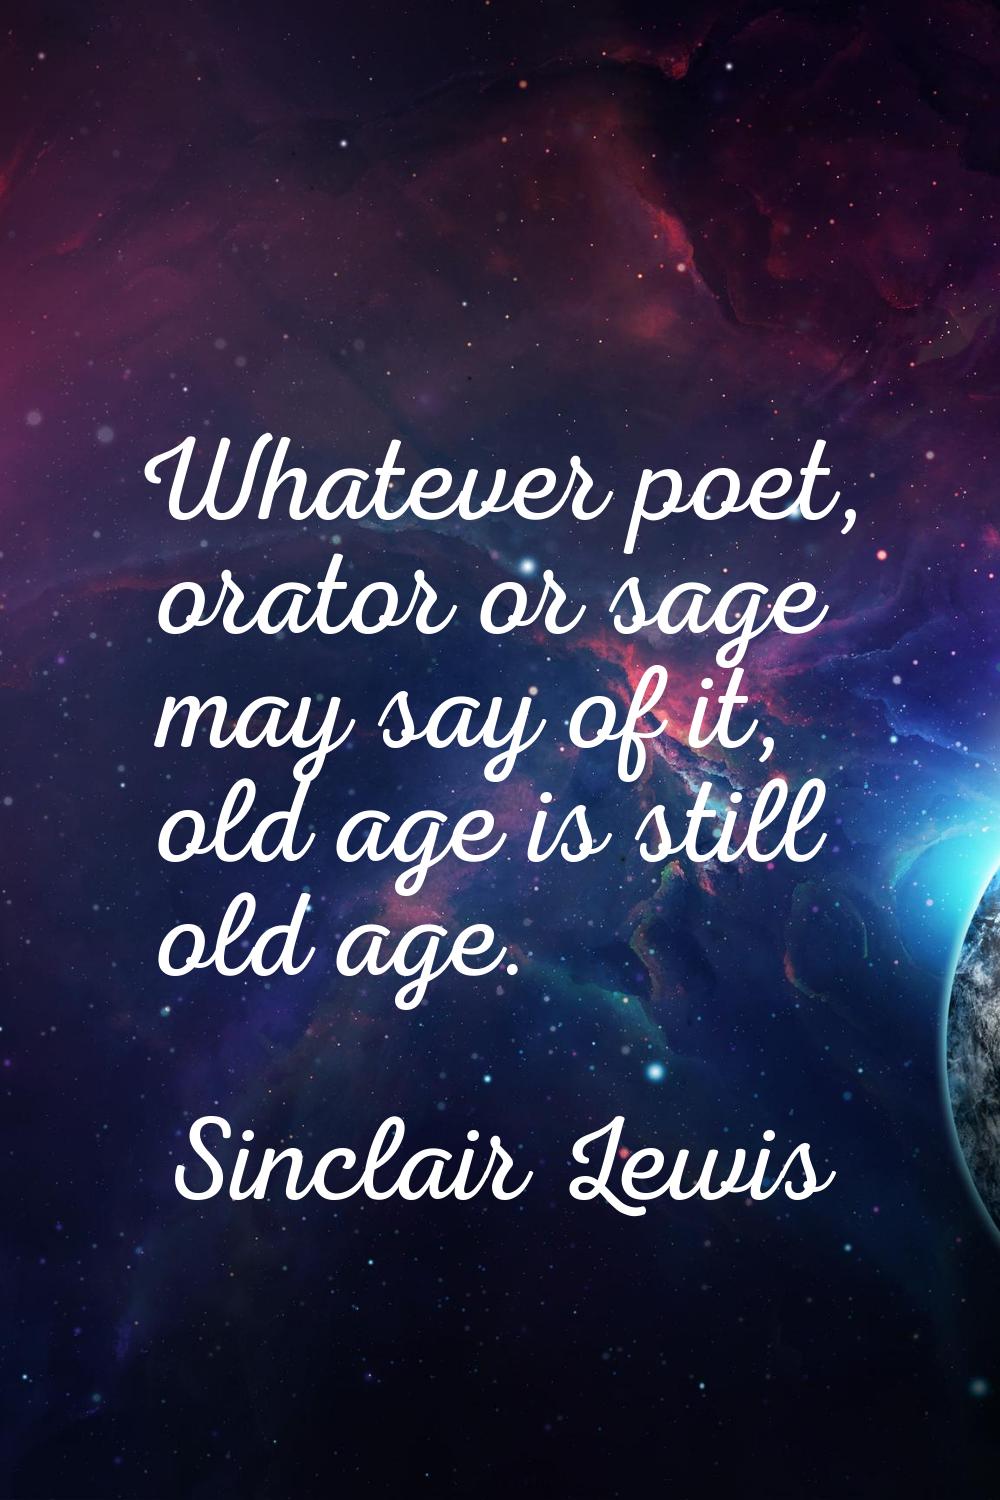 Whatever poet, orator or sage may say of it, old age is still old age.